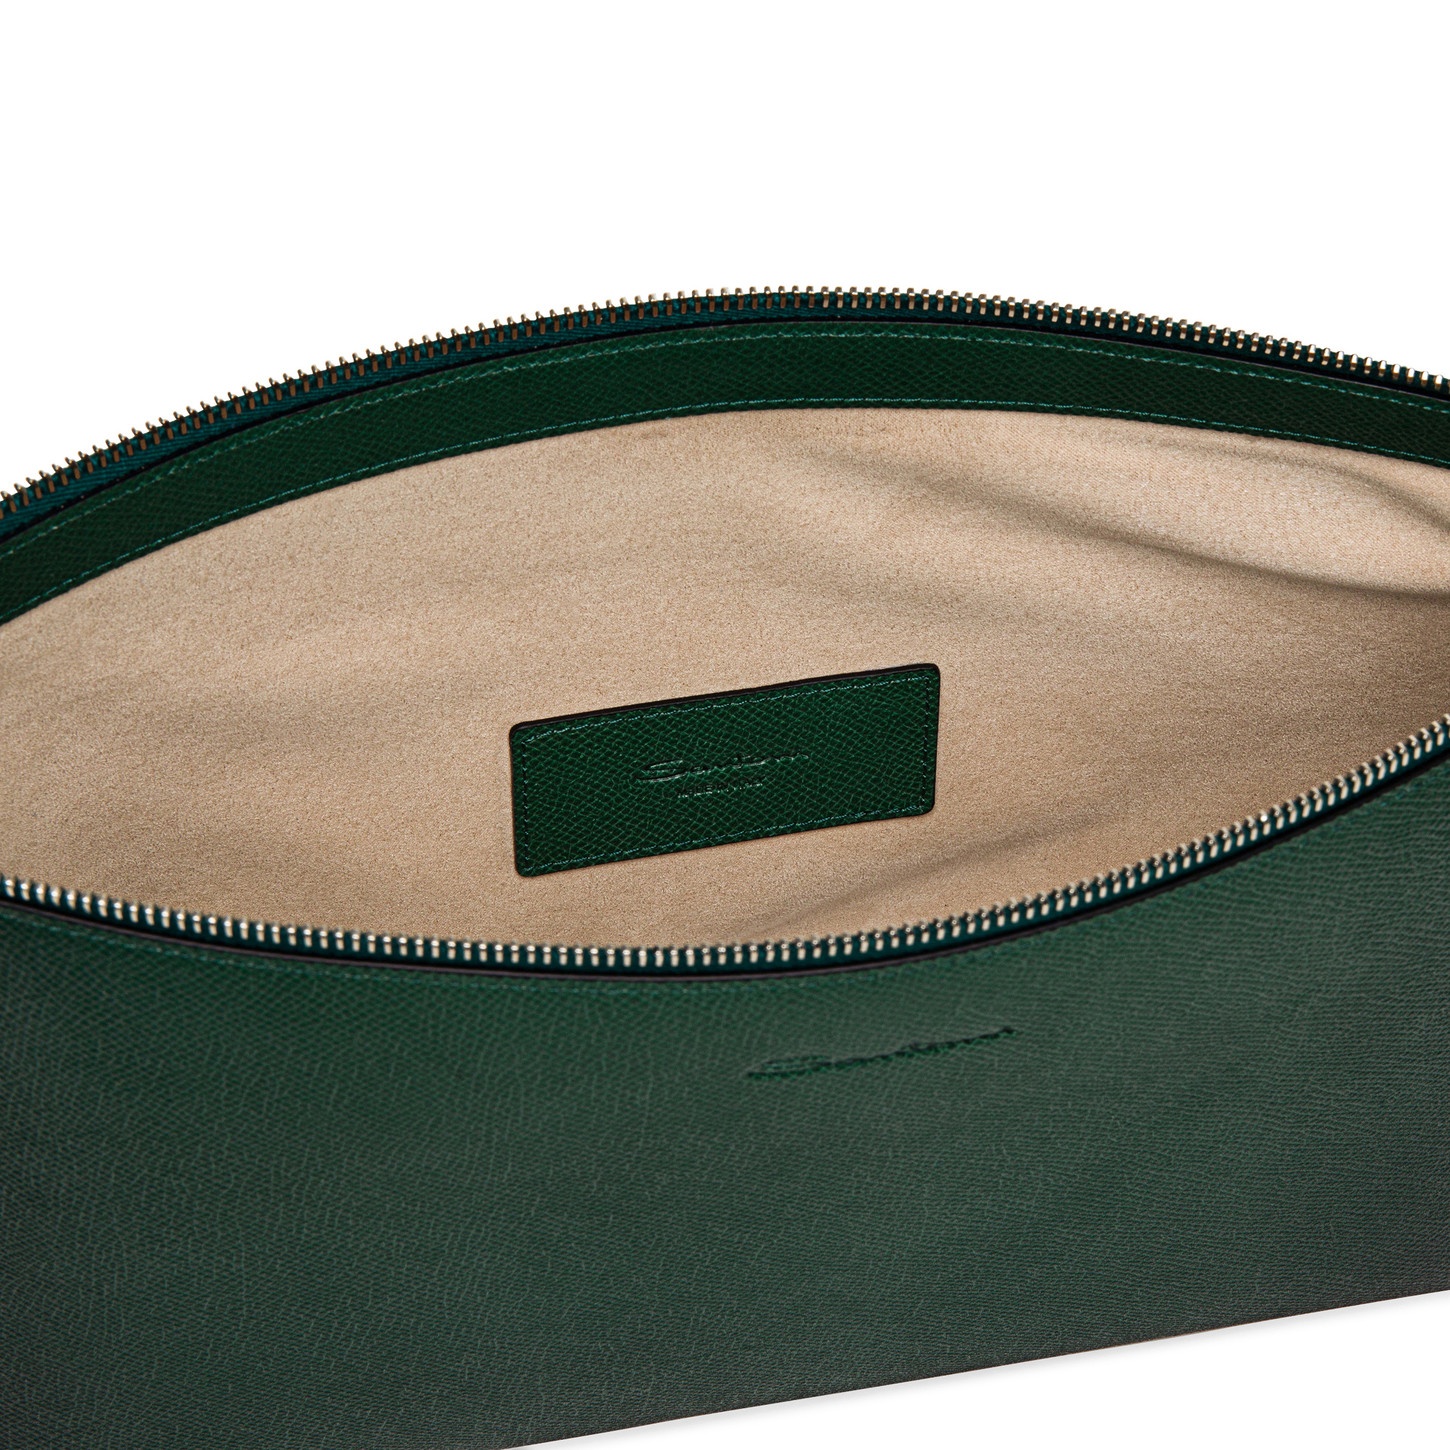 Green saffiano leather pouch - 3